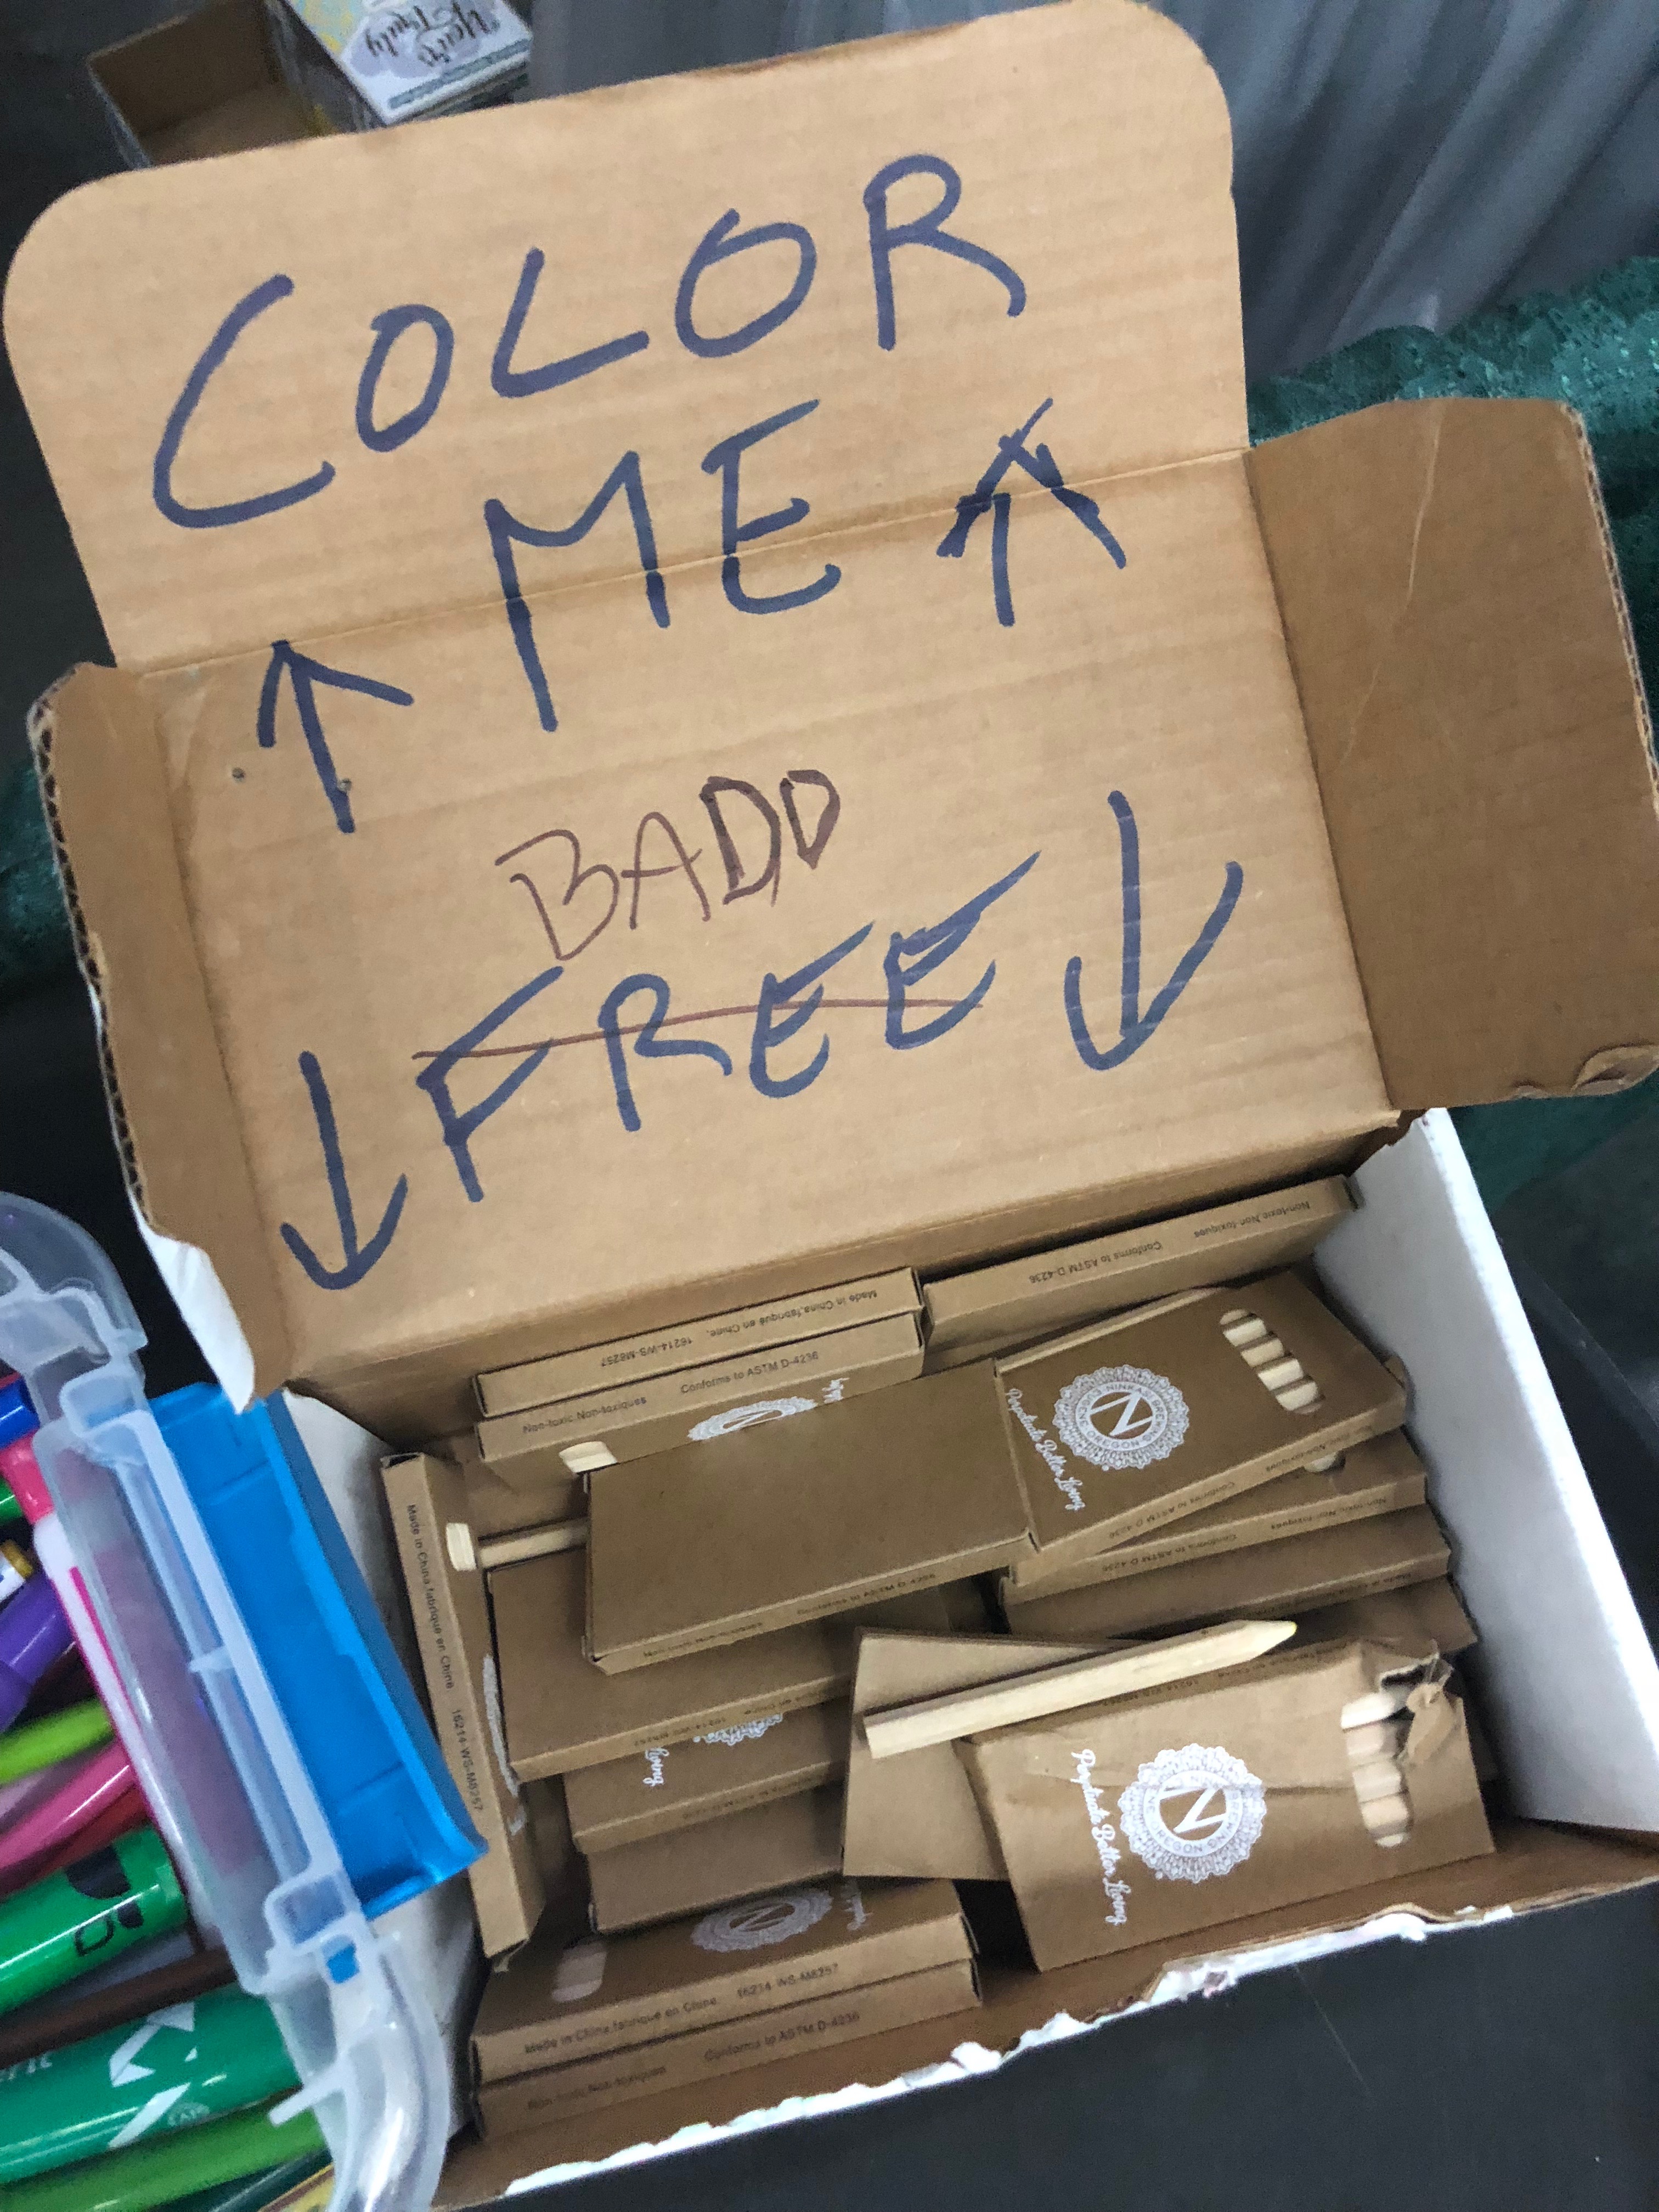 Color Me "BADD" at the Ninkasi Brewing booth during the Homebrew Con 2018 Kickoff Party.